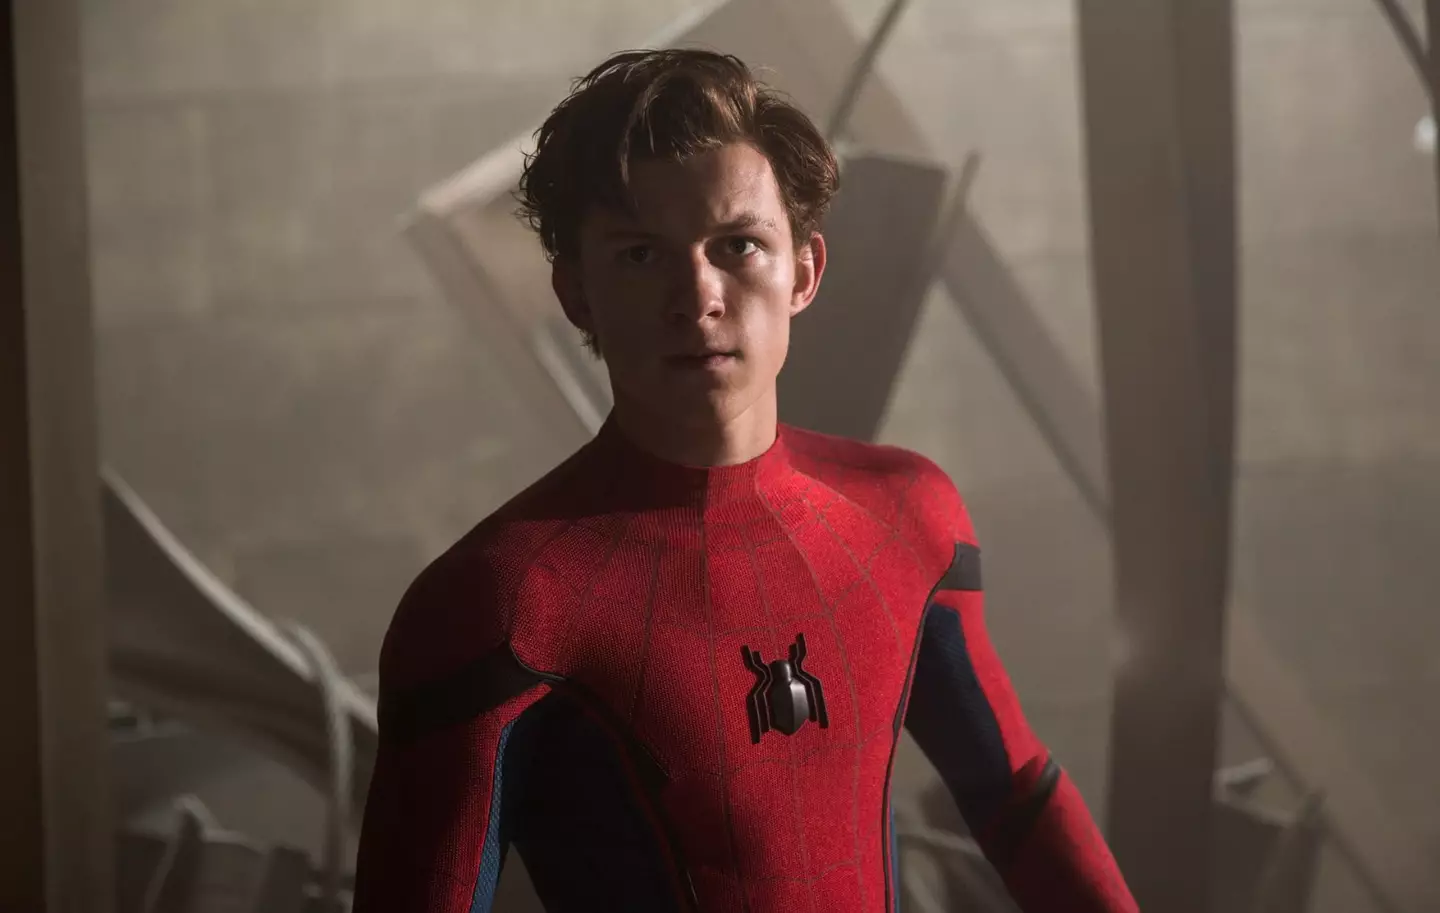 Tom Holland played Spider-Man when he joined the MCU in 2016.